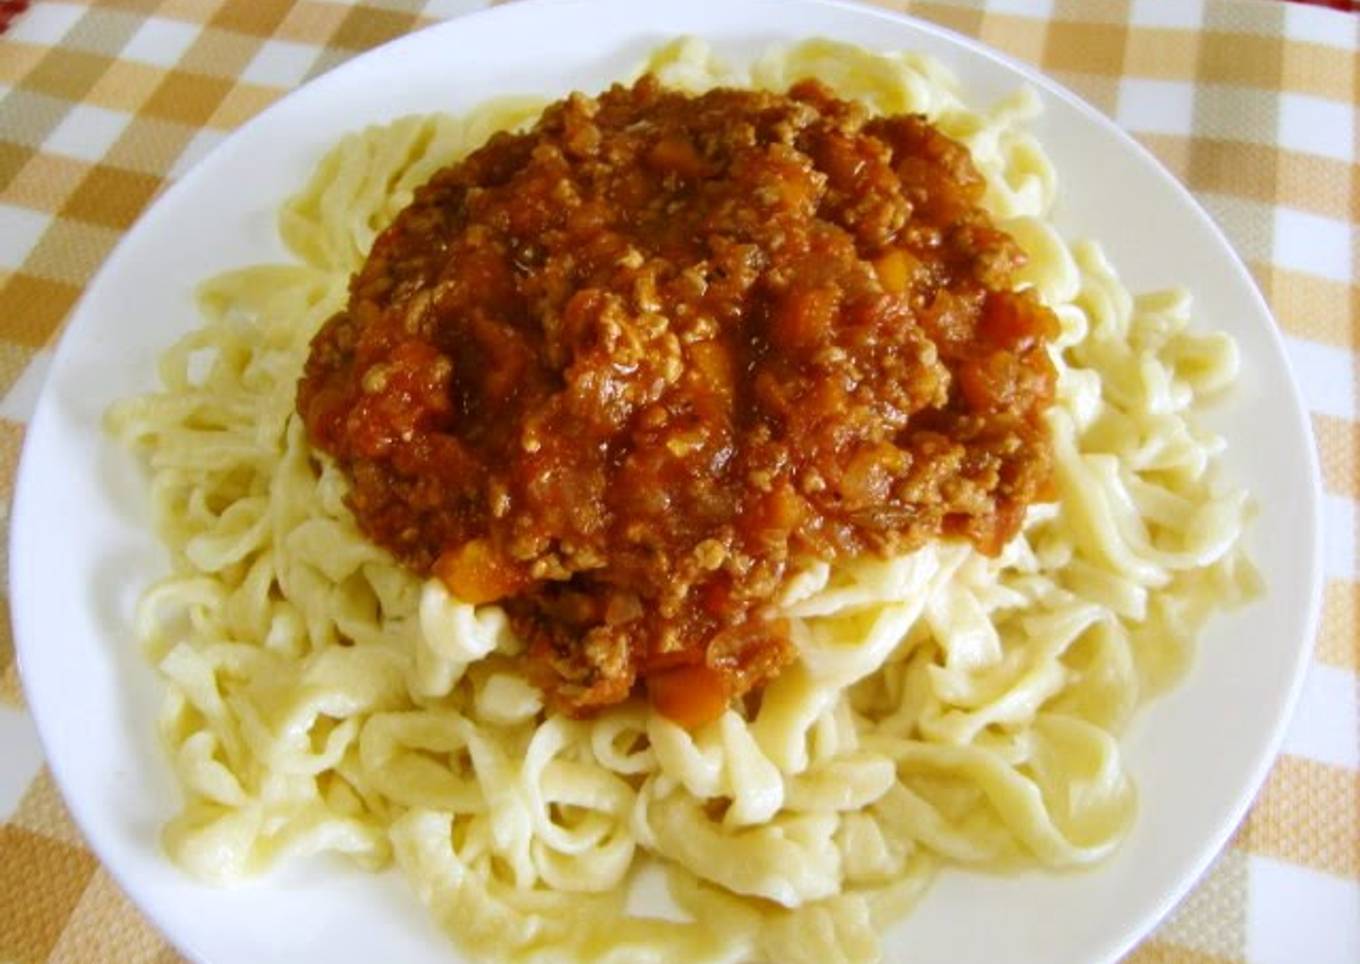 Homemade fresh pasta with meat sauce